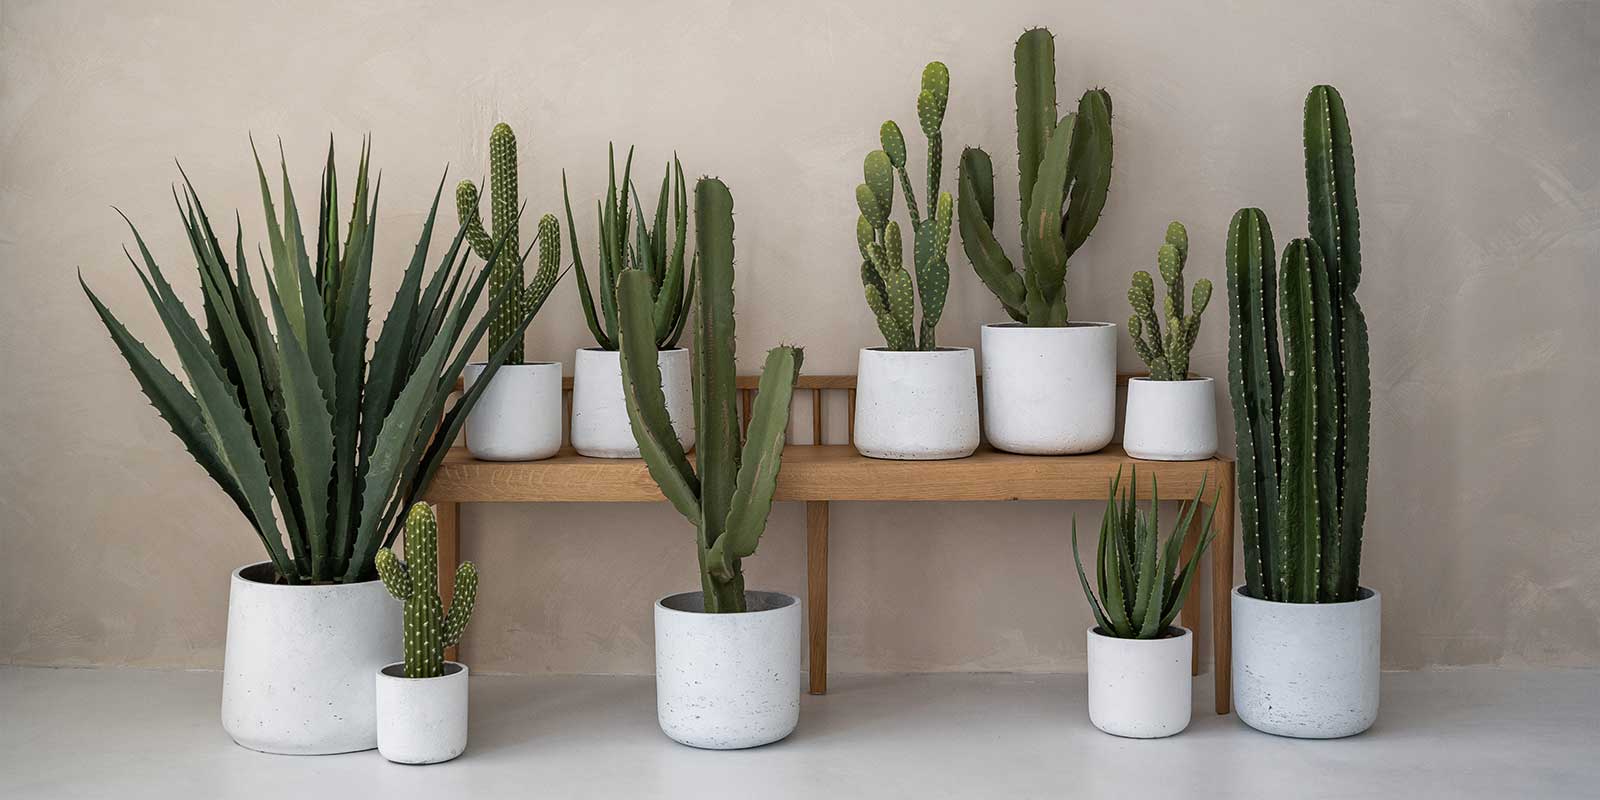 The Rough White Washed Planter & Plant Pot Collection